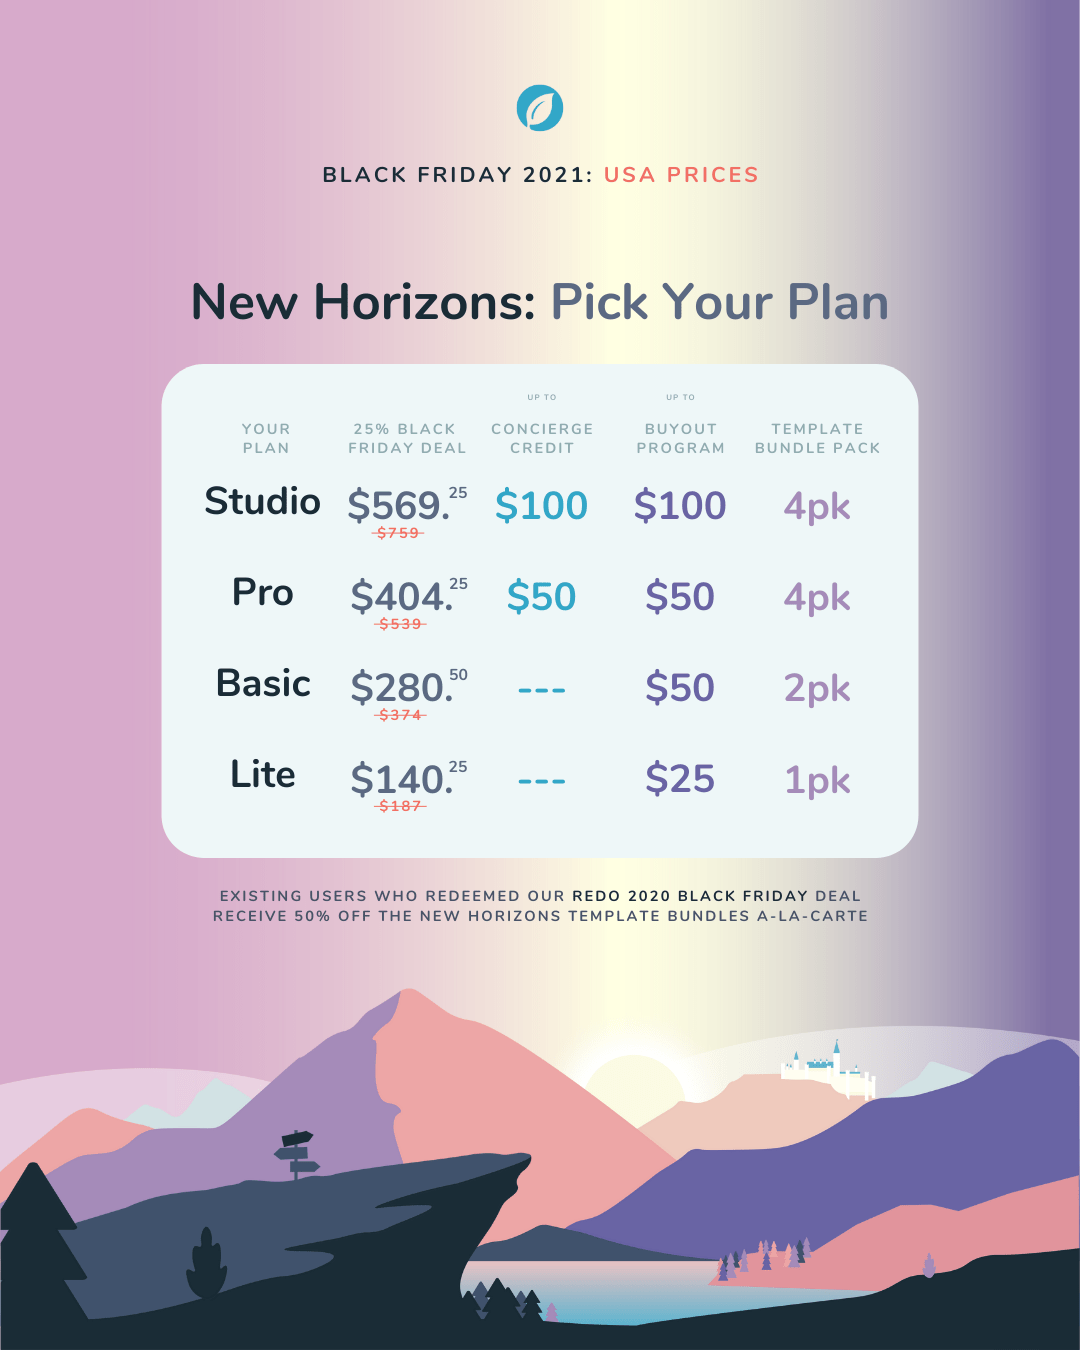 Black Friday Pick Your Plan US Pricing Guide